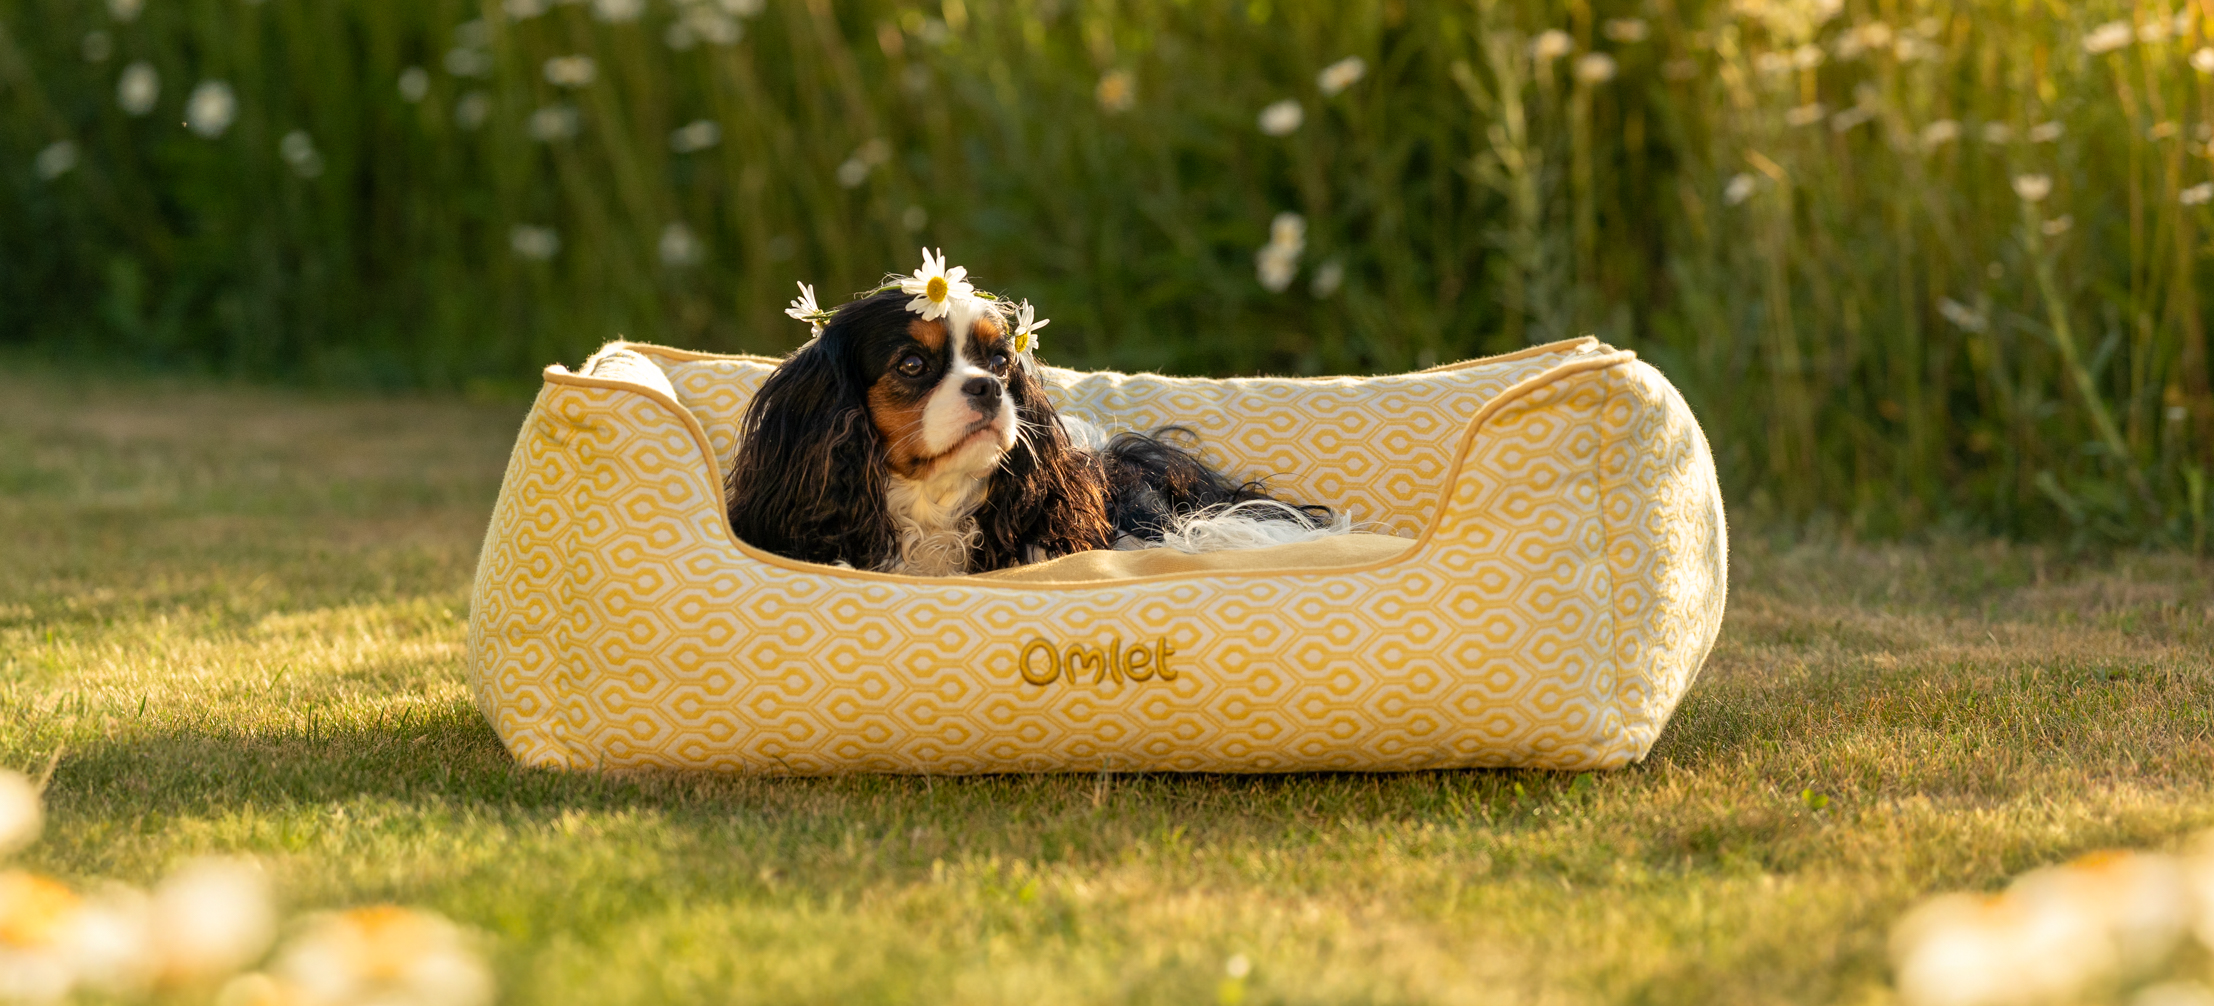 King Charles spaniel enjoying their time on the Omlet Nest dog bed in Honeycomb Pollen